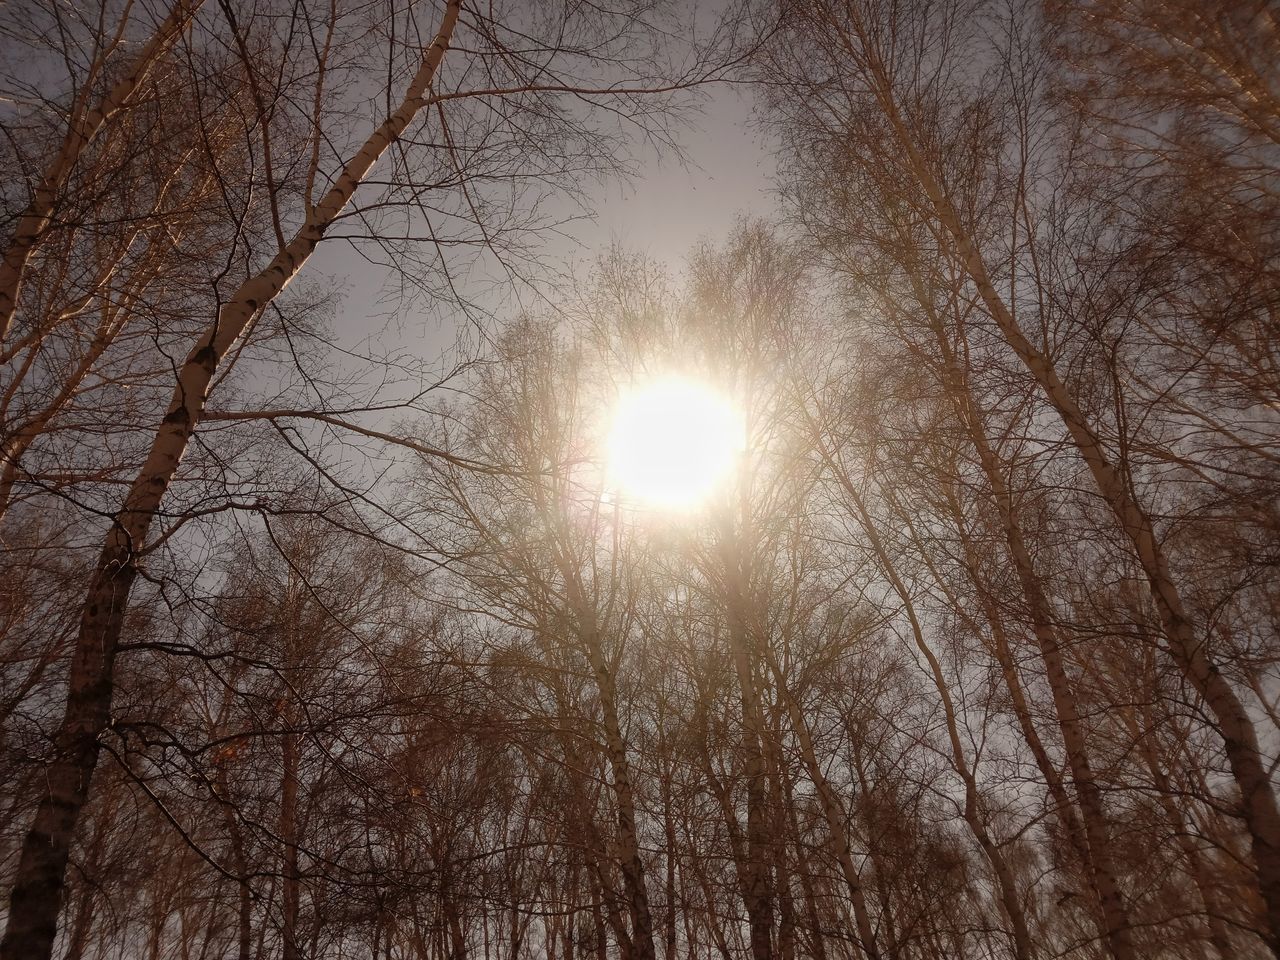 tree, sky, bare tree, sun, plant, winter, sunlight, nature, tranquility, beauty in nature, branch, morning, lens flare, low angle view, no people, light, fog, tranquil scene, sunbeam, scenics - nature, snow, astronomical object, outdoors, silhouette, forest, non-urban scene, growth, land, idyllic, back lit, cold temperature, day, environment, mist, darkness